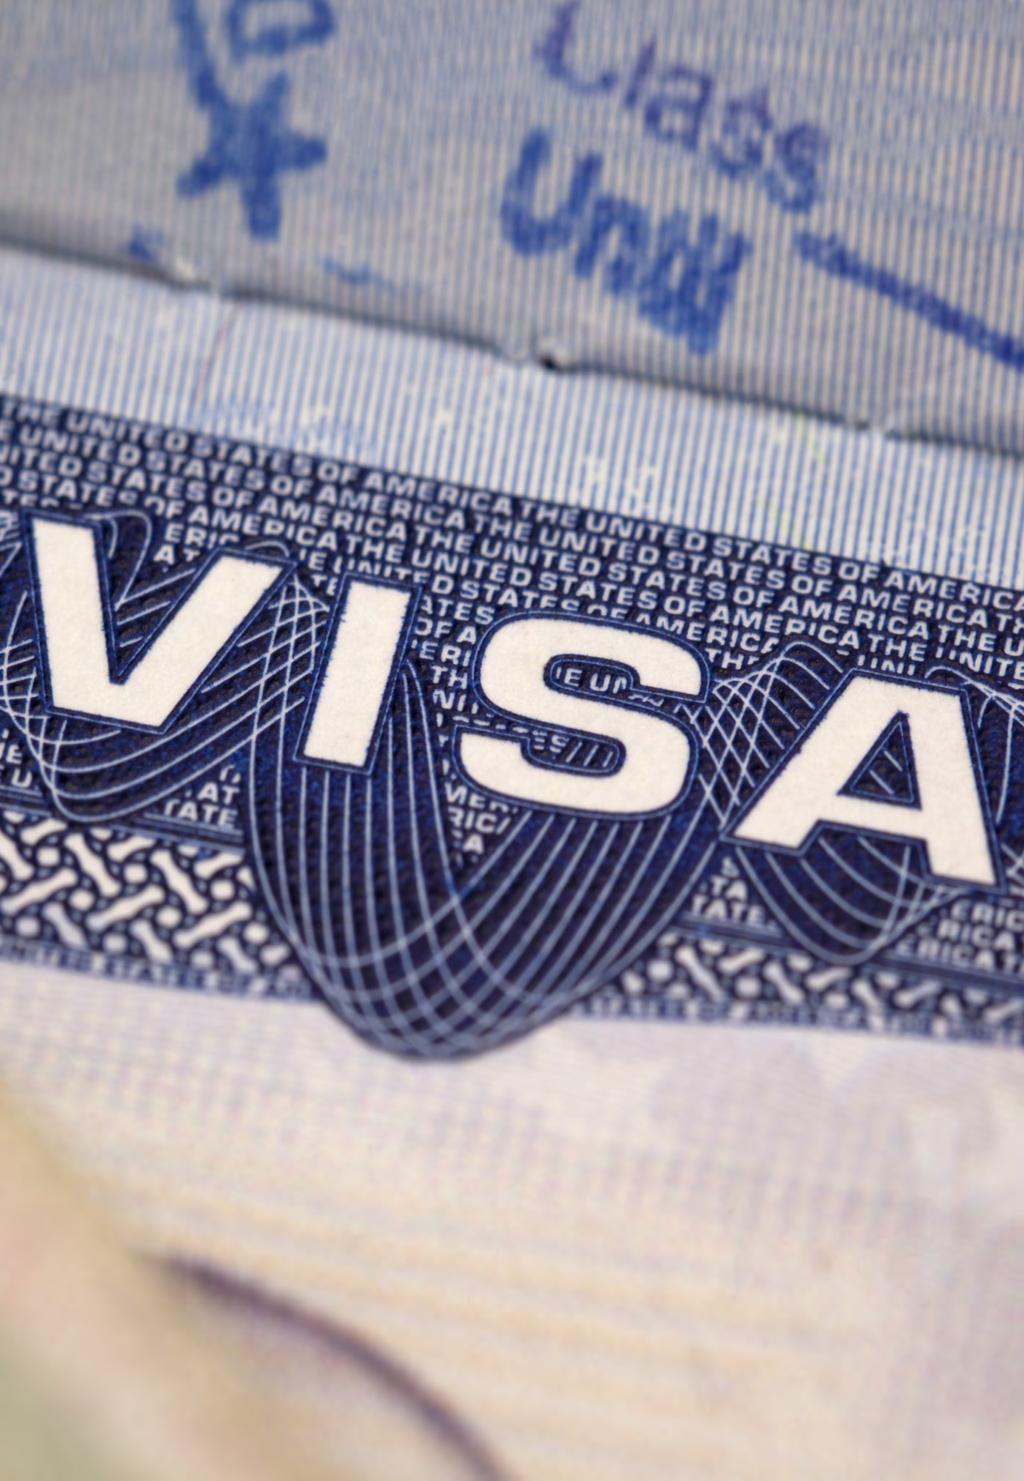 OVERSEAS VISA ASSISTANCE Student Business Leasures Why PVC?